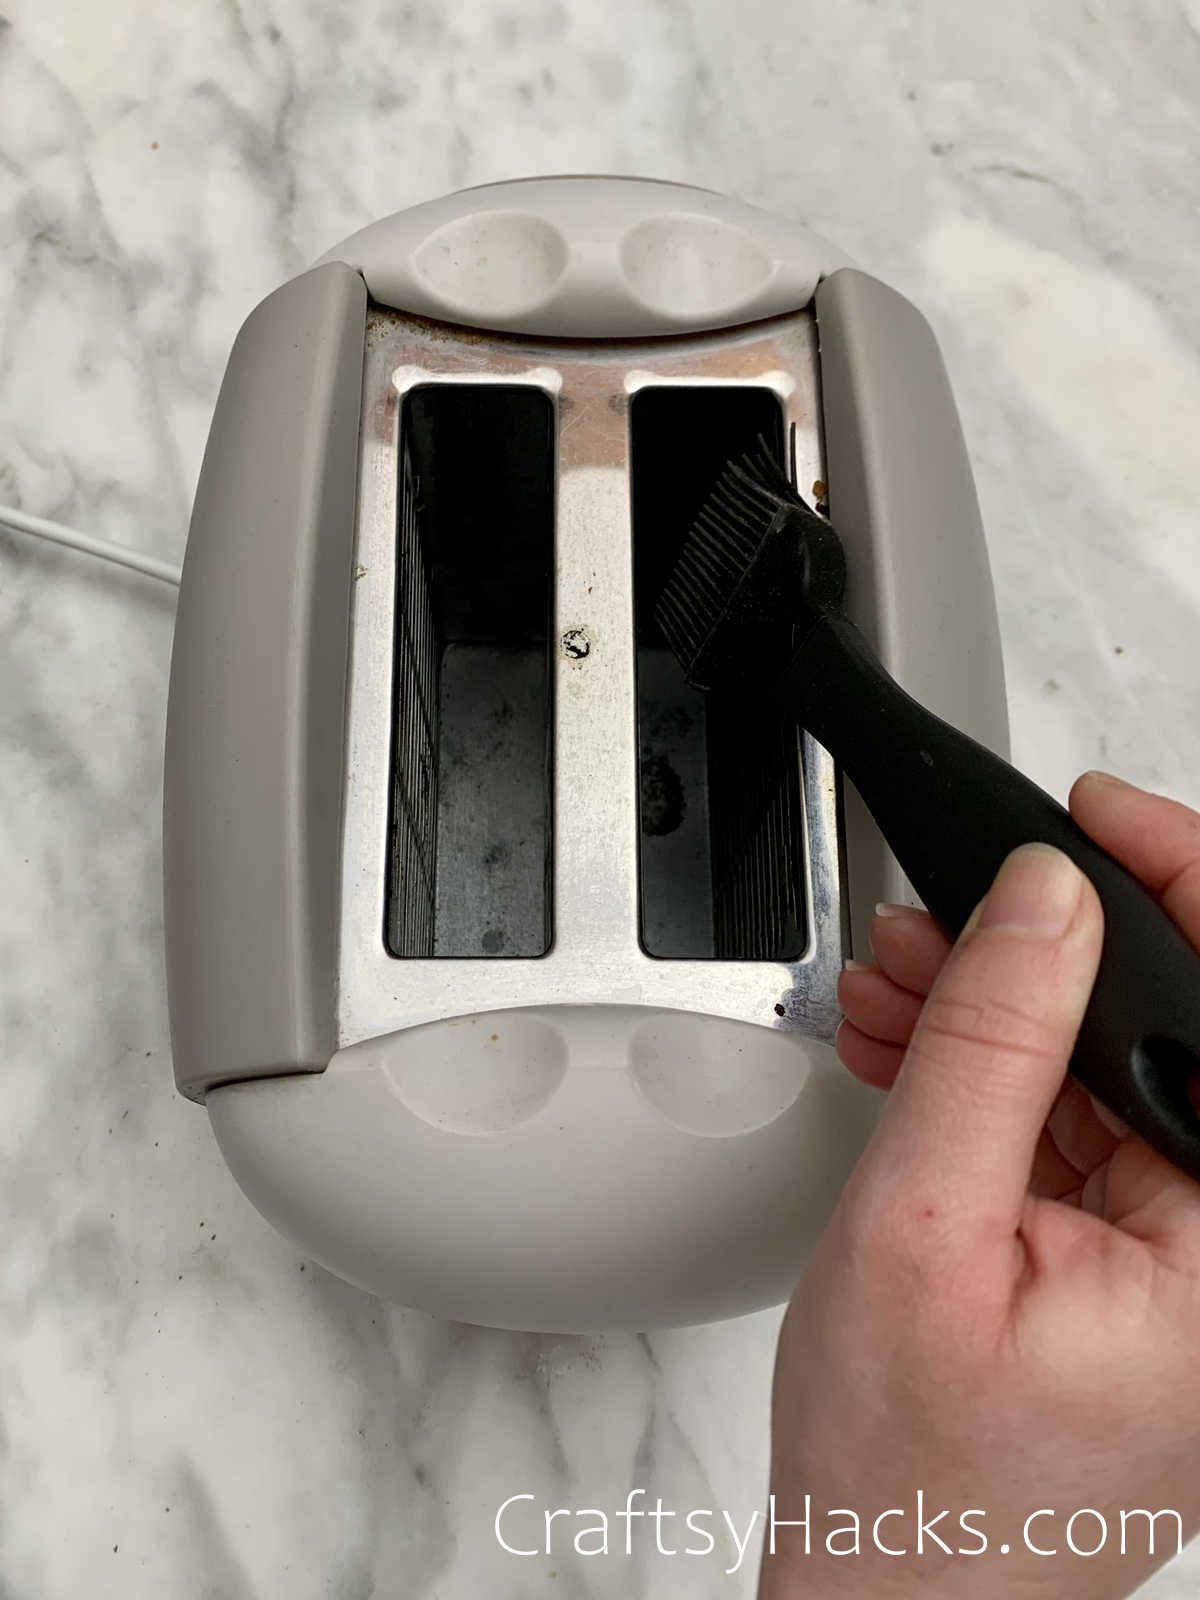 clean toaster with a pastry brush